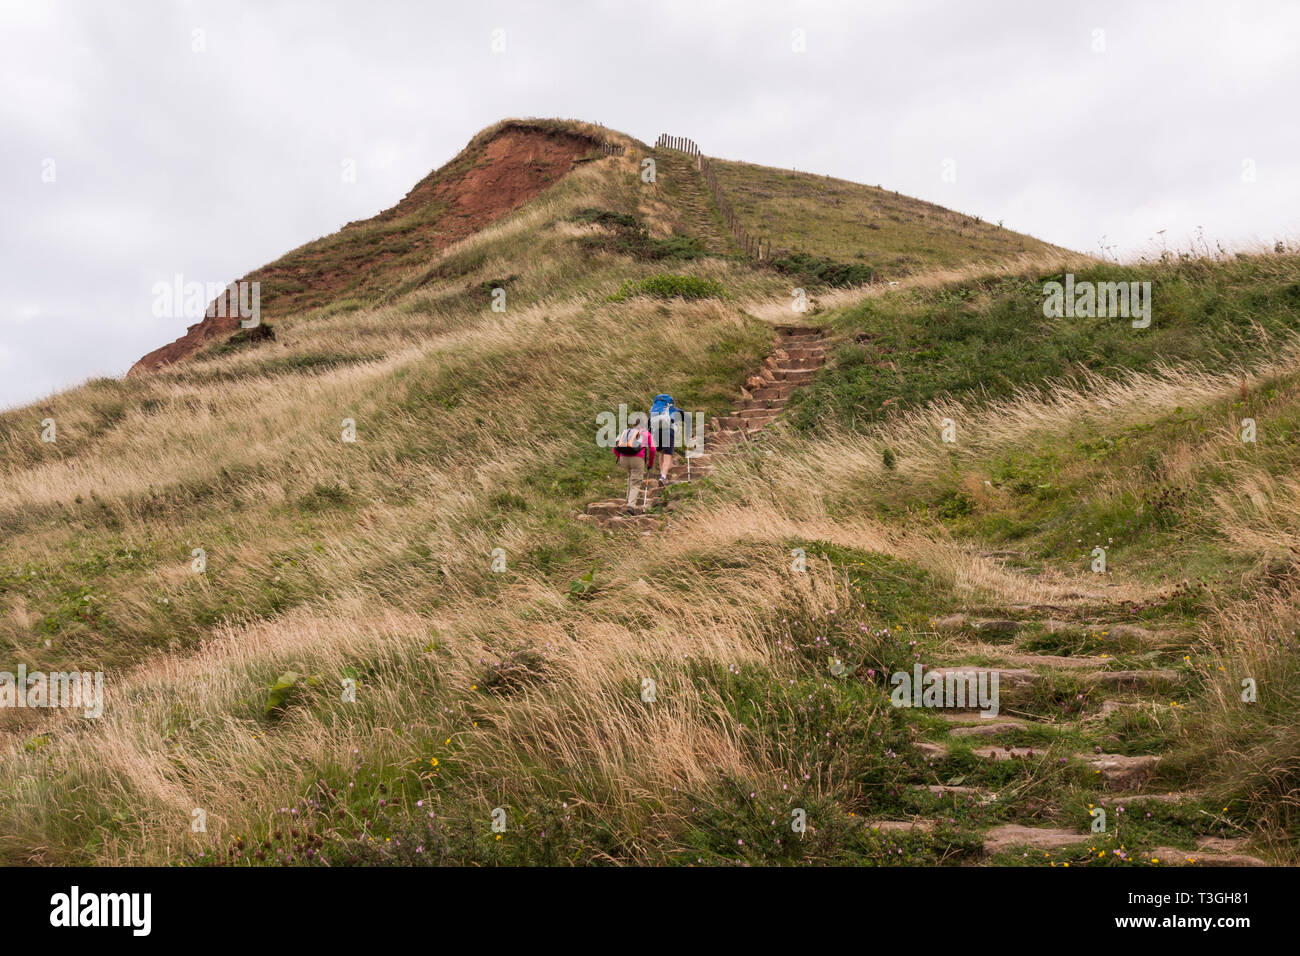 A male and female hikers climbing the steep hills on the Cleveland Way at Skinningrove in North Yorkshire Stock Photo